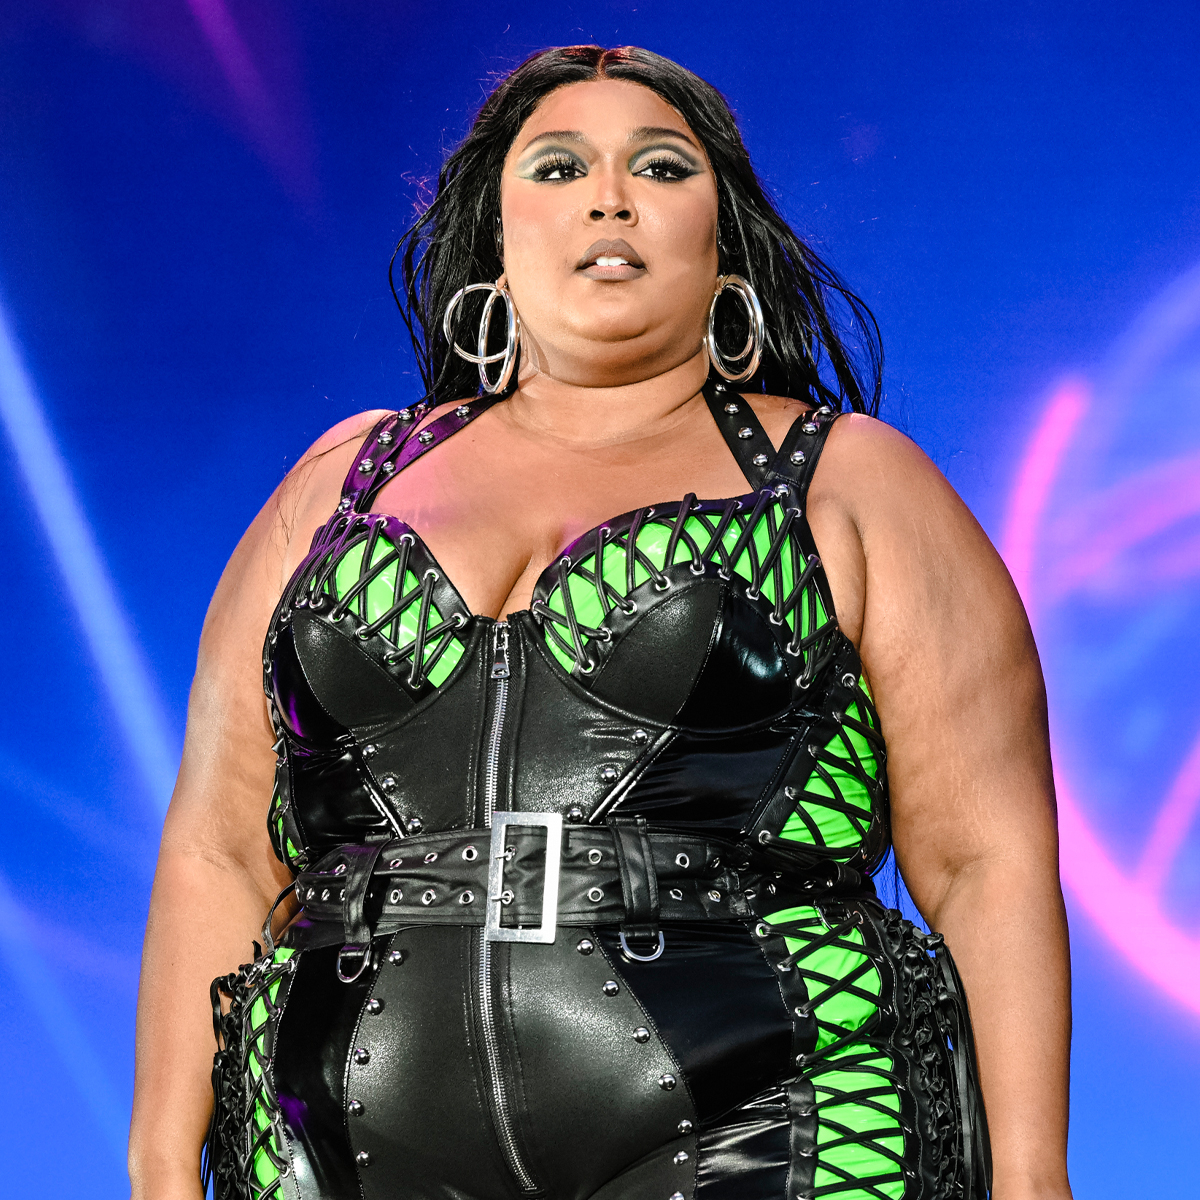 Lizzo Sued By Former Dancers for Alleged Sexual Harassment and Shaming